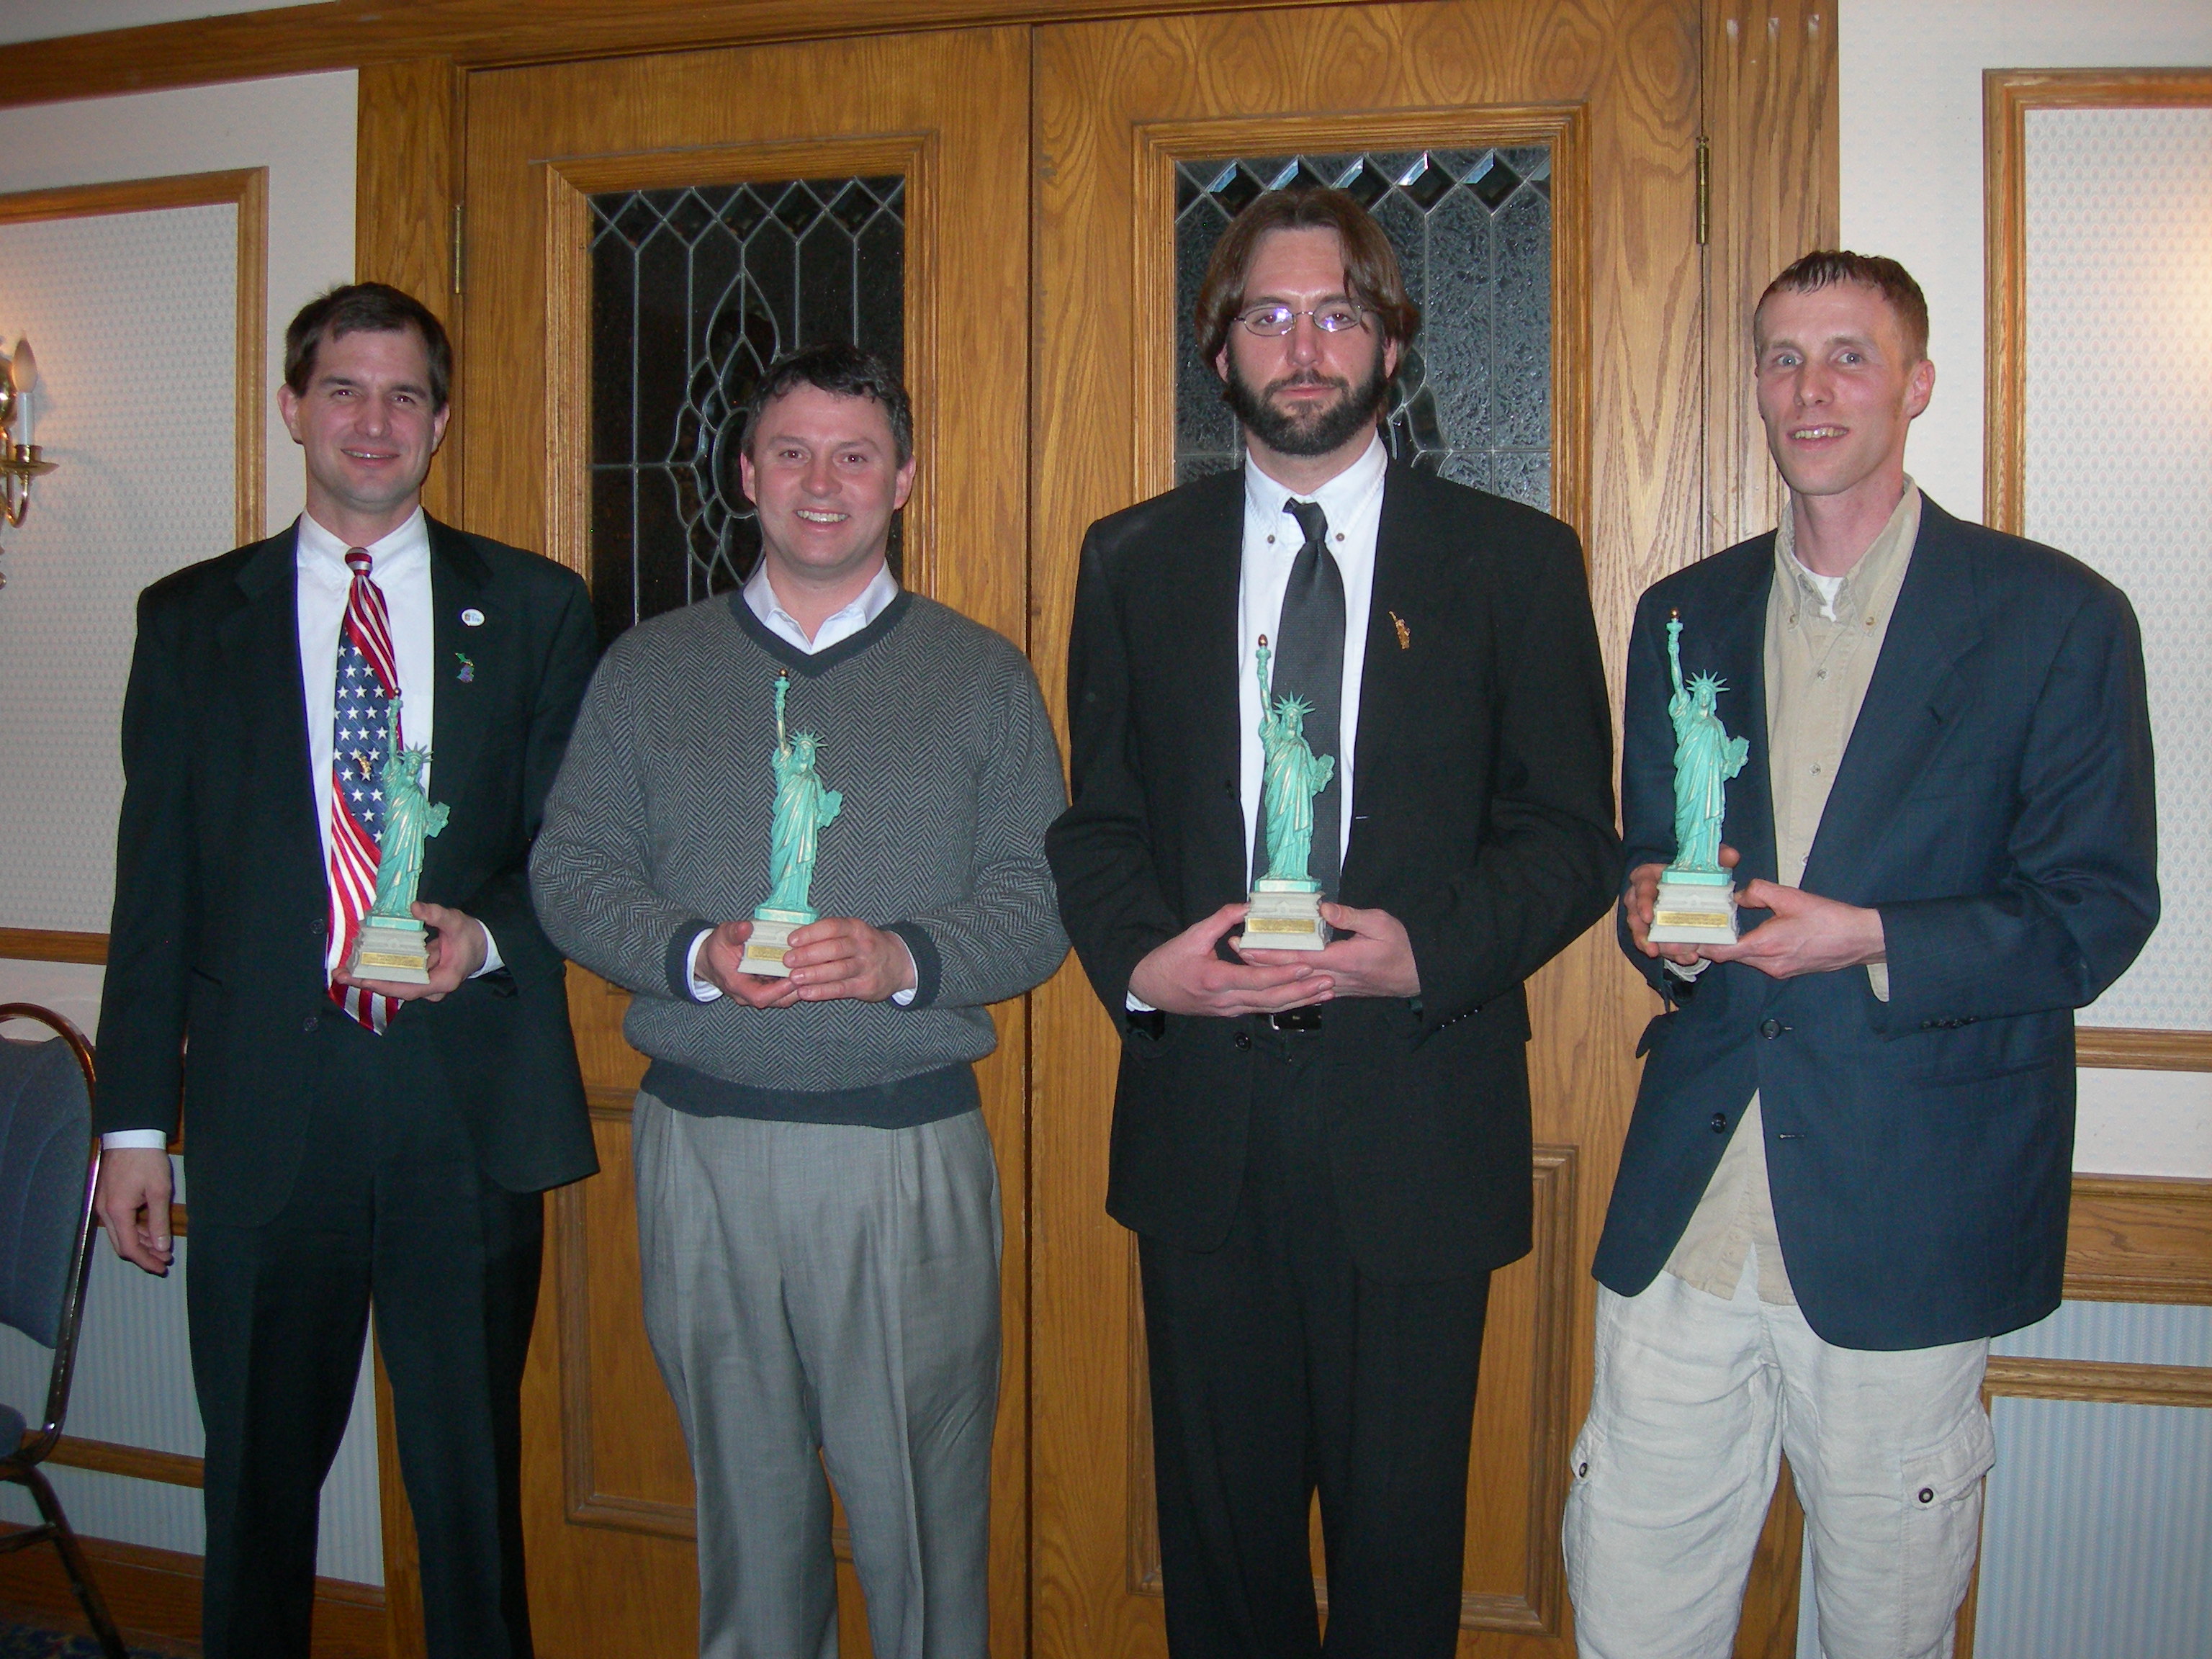 Defender of Liberty Award winners for 2008. Left to Right: David Eisenbacher (Promotor of Liberty), Leon Drolet (spokesperson for Liberty), Greg Stempfle (Producer of Liberty), and Charles Snyder III on behalf of Krystal Martinez (spokesperson for Liberty).